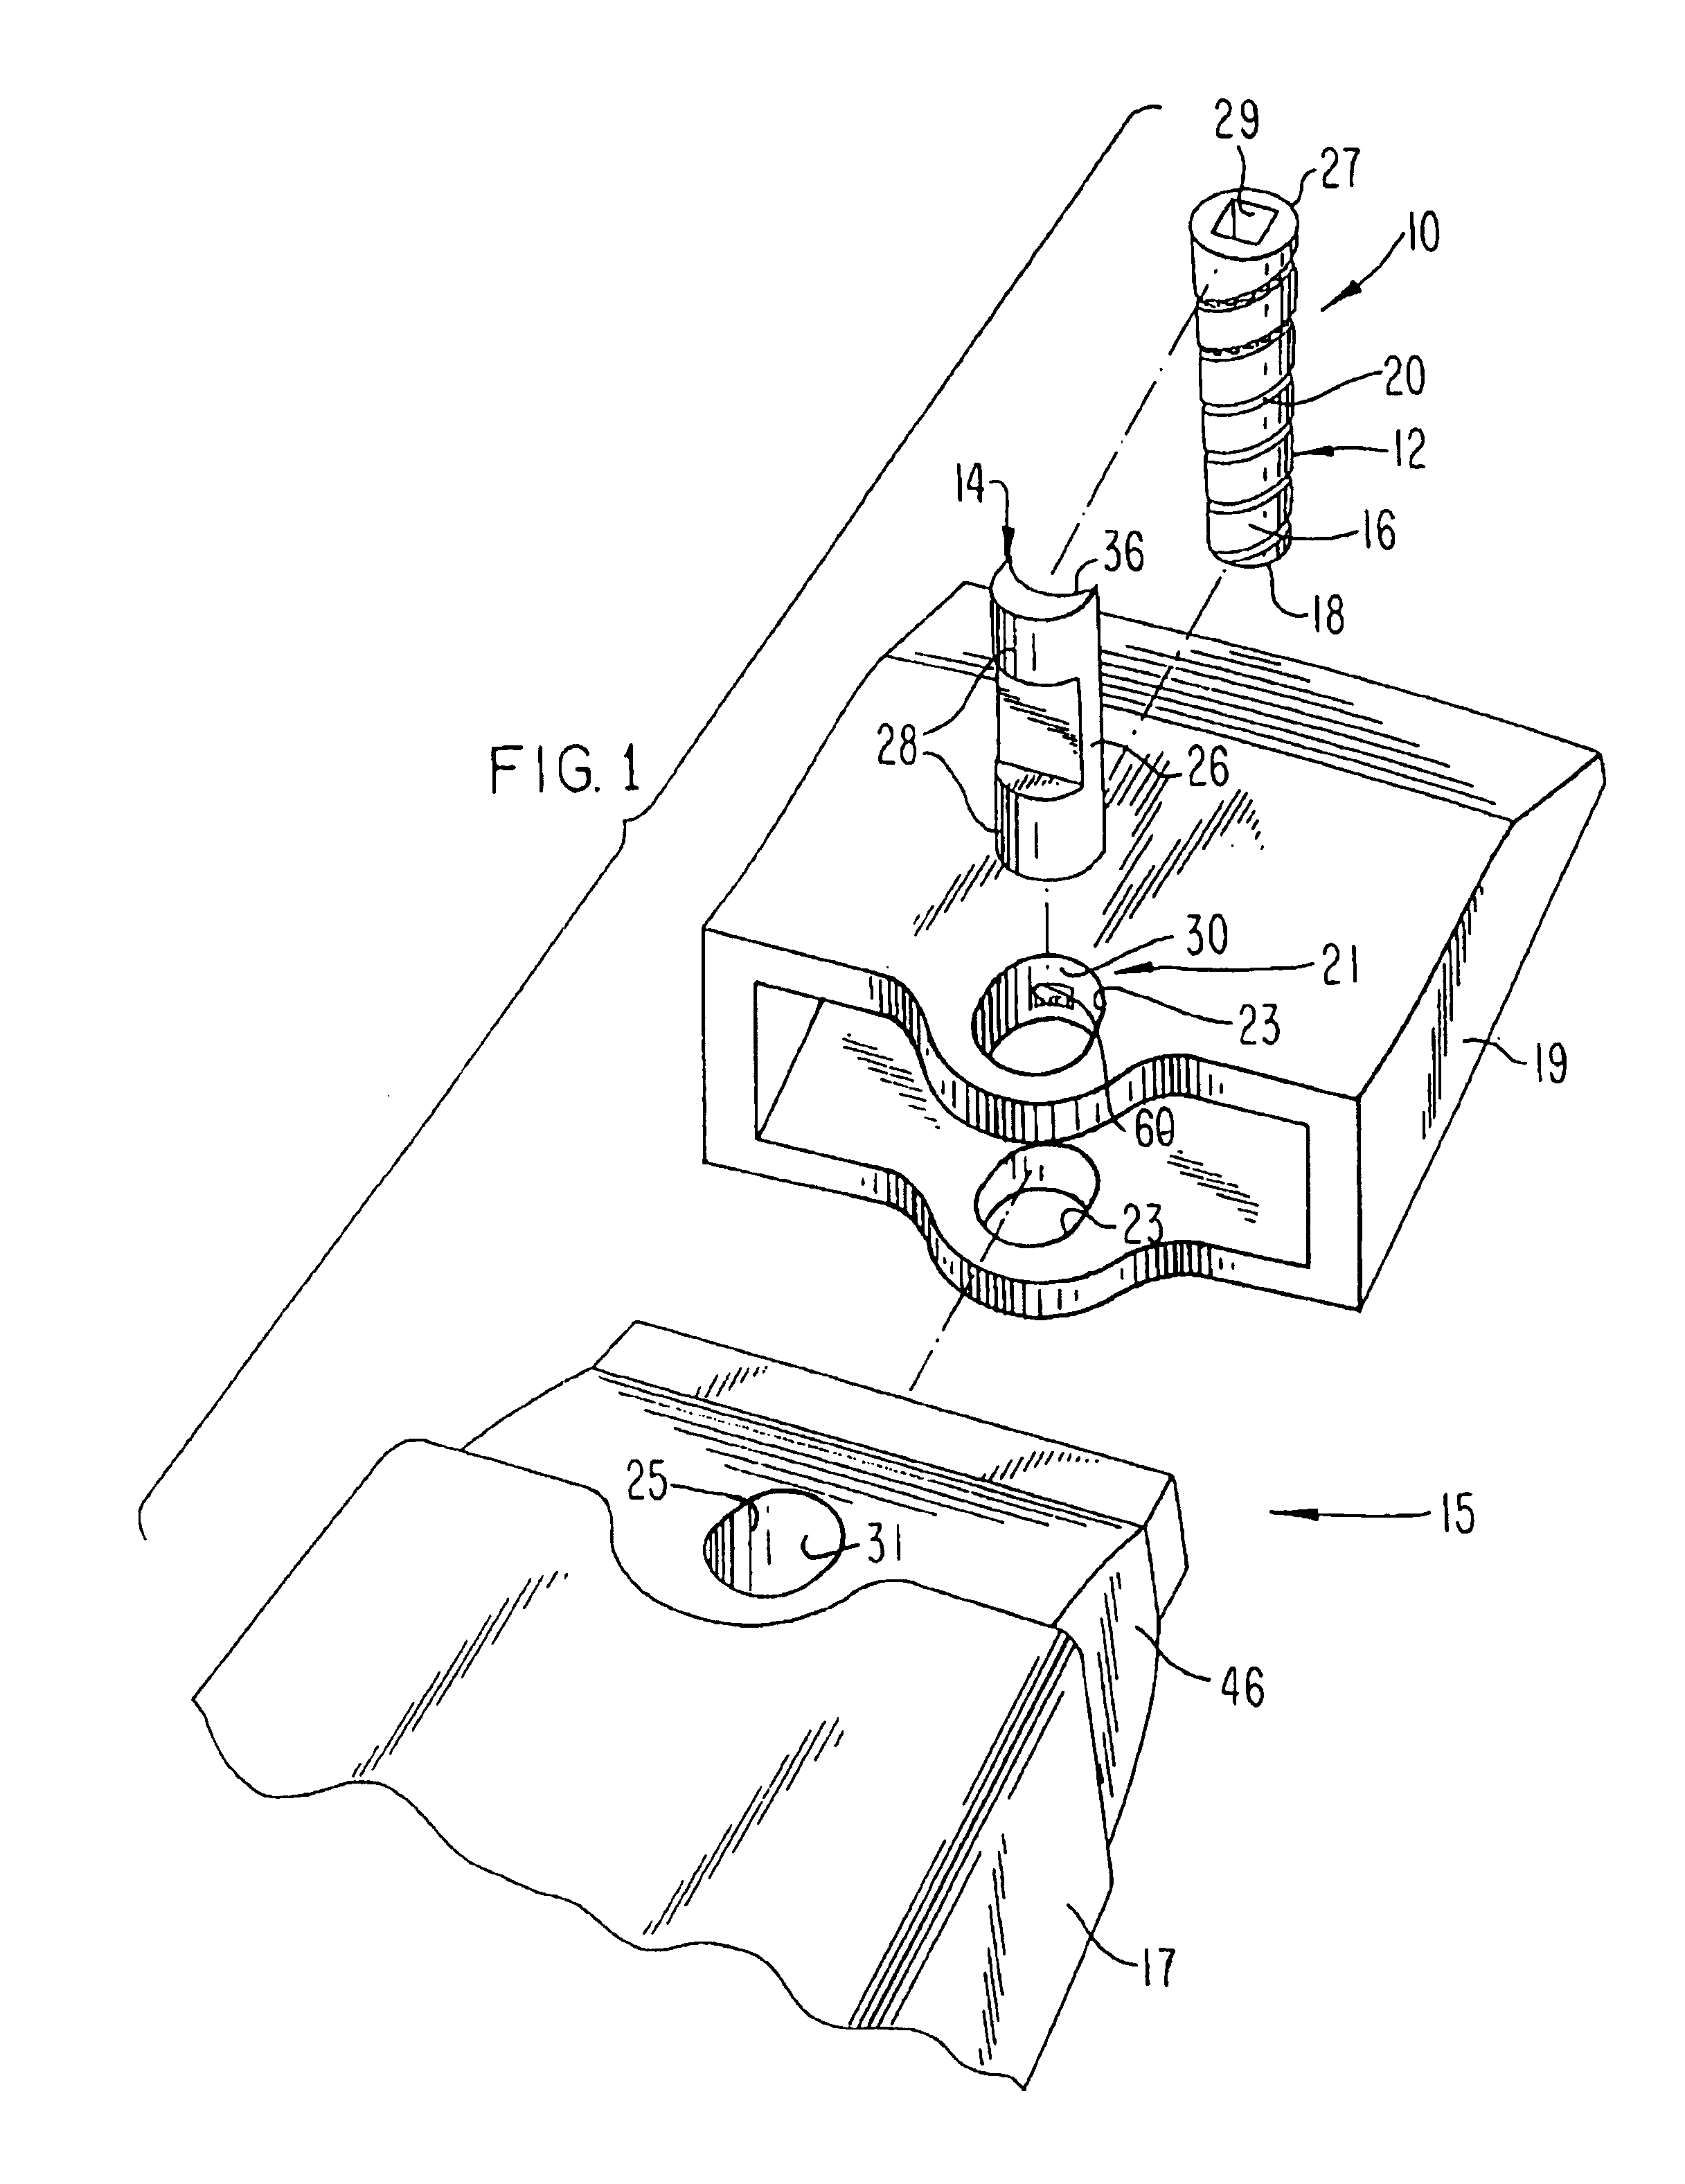 Releasable coupling assembly